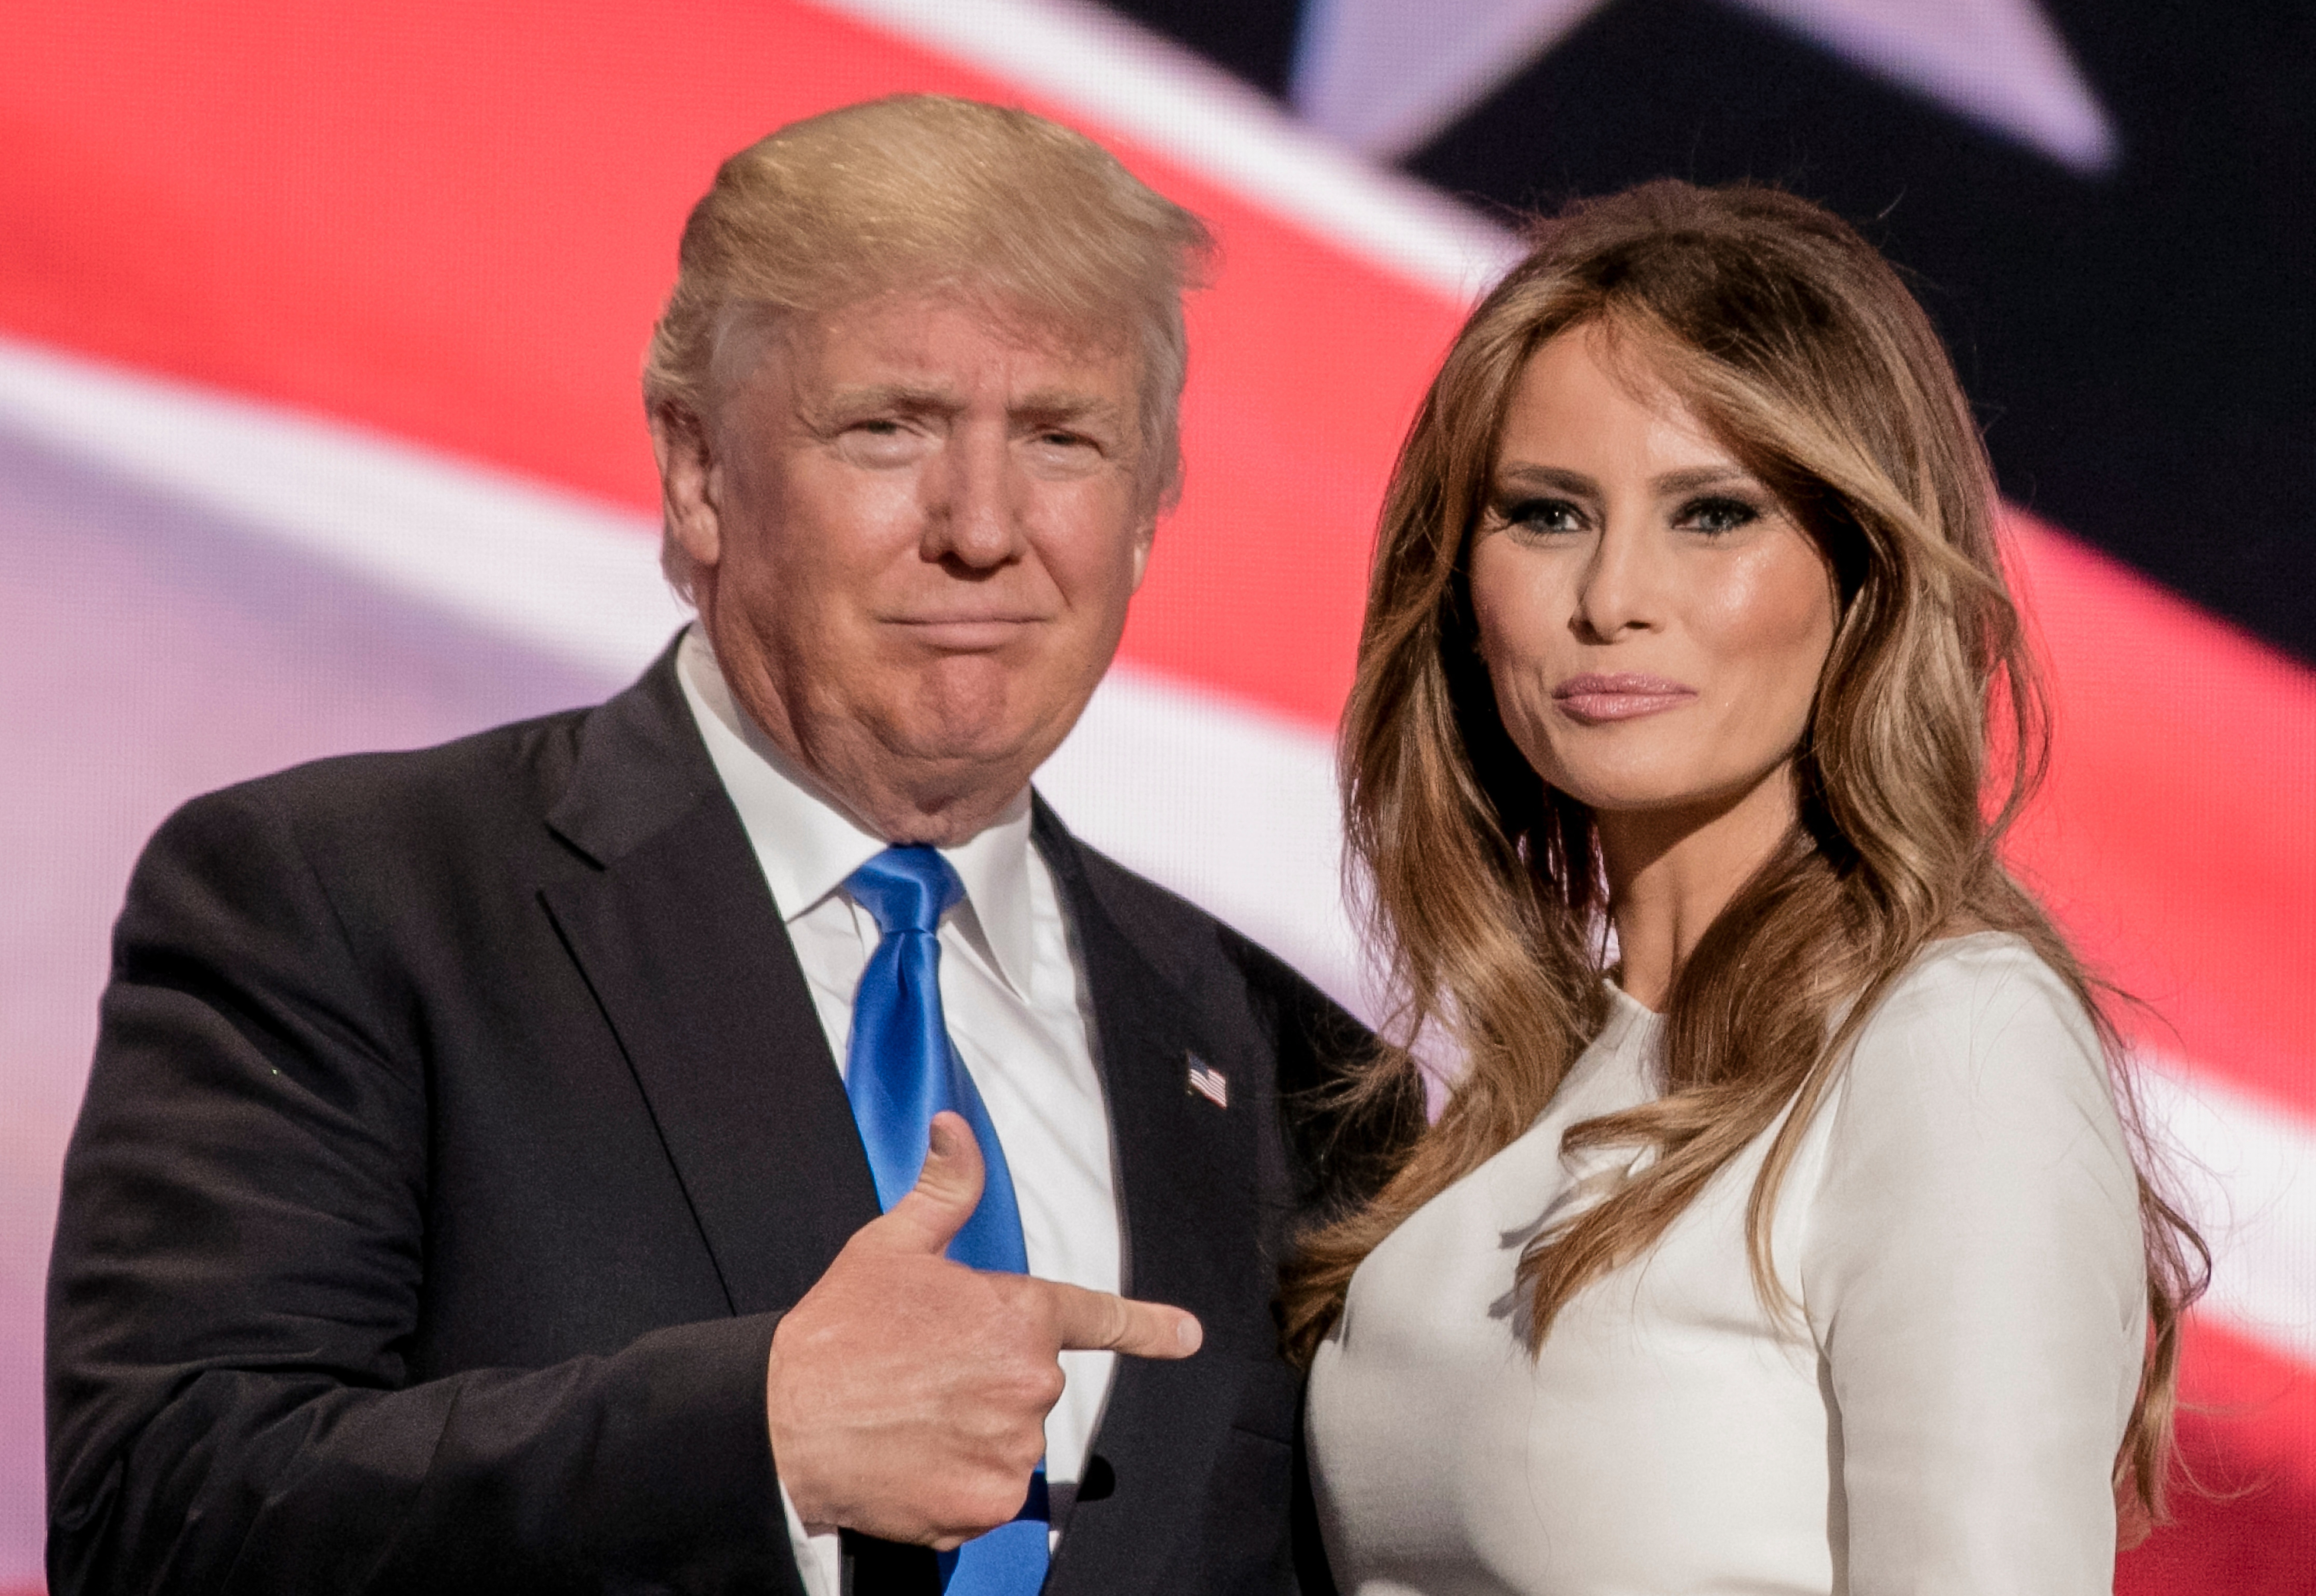 Trump&#39;s Voter-Fraud PAC Paid $60,000 To Melania&#39;s Fashion Designer For &#39;Strategy Consulting&#39;